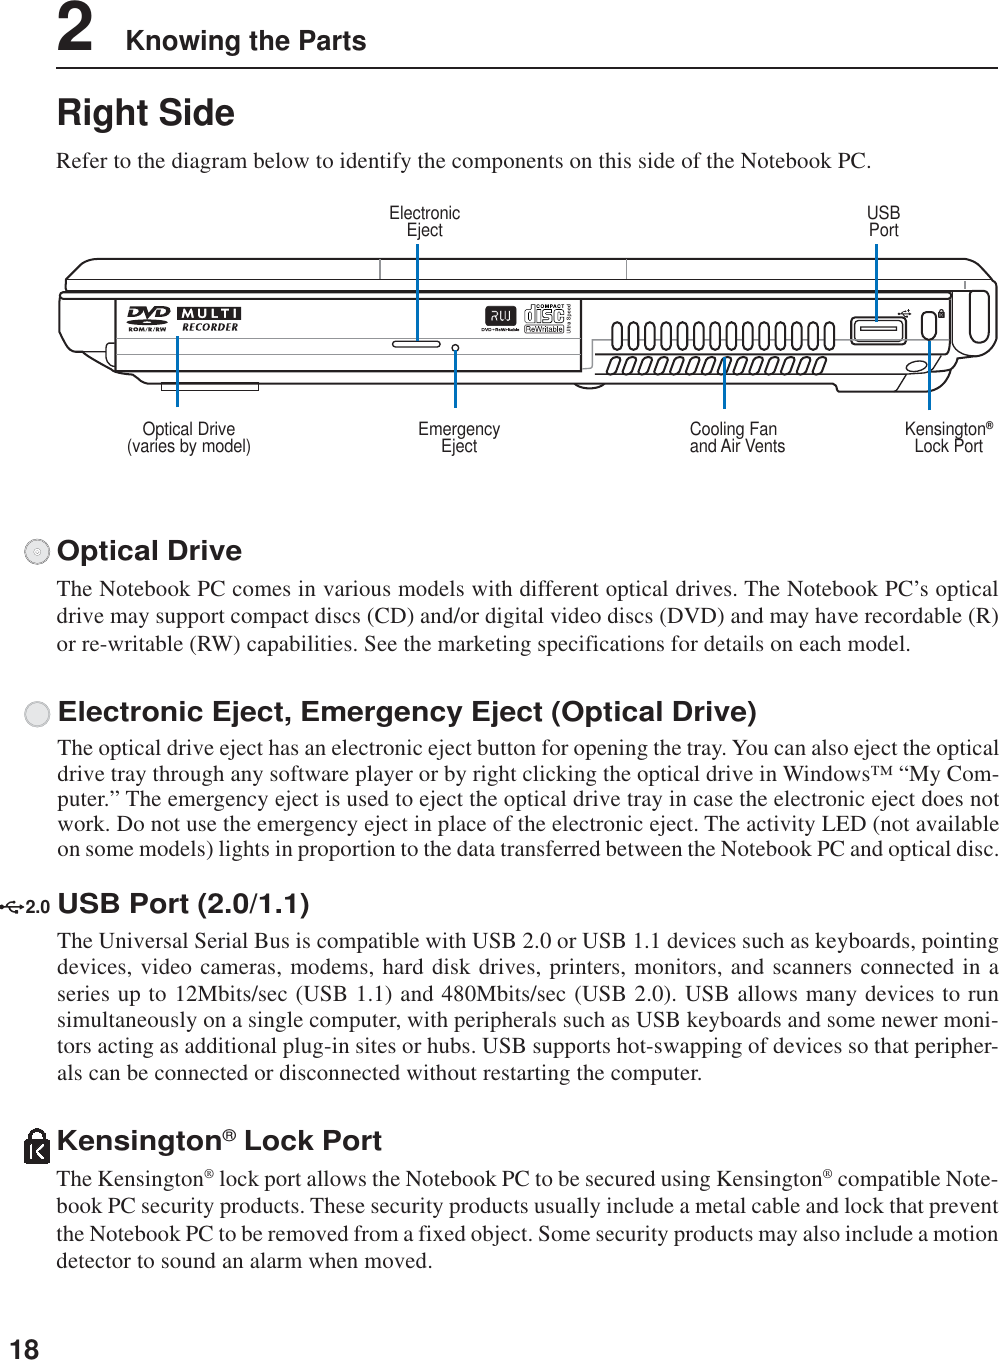 182    Knowing the PartsRight SideRefer to the diagram below to identify the components on this side of the Notebook PC.Cooling Fanand Air VentsUSBPortKensington®Lock PortElectronicEjectOptical Drive(varies by model) EmergencyEjectElectronic Eject, Emergency Eject (Optical Drive)The optical drive eject has an electronic eject button for opening the tray. You can also eject the opticaldrive tray through any software player or by right clicking the optical drive in Windows™ “My Com-puter.” The emergency eject is used to eject the optical drive tray in case the electronic eject does notwork. Do not use the emergency eject in place of the electronic eject. The activity LED (not availableon some models) lights in proportion to the data transferred between the Notebook PC and optical disc.Optical DriveThe Notebook PC comes in various models with different optical drives. The Notebook PC’s opticaldrive may support compact discs (CD) and/or digital video discs (DVD) and may have recordable (R)or re-writable (RW) capabilities. See the marketing specifications for details on each model.Kensington® Lock PortThe Kensington® lock port allows the Notebook PC to be secured using Kensington® compatible Note-book PC security products. These security products usually include a metal cable and lock that preventthe Notebook PC to be removed from a fixed object. Some security products may also include a motiondetector to sound an alarm when moved.2.0USB Port (2.0/1.1)The Universal Serial Bus is compatible with USB 2.0 or USB 1.1 devices such as keyboards, pointingdevices, video cameras, modems, hard disk drives, printers, monitors, and scanners connected in aseries up to 12Mbits/sec (USB 1.1) and 480Mbits/sec (USB 2.0). USB allows many devices to runsimultaneously on a single computer, with peripherals such as USB keyboards and some newer moni-tors acting as additional plug-in sites or hubs. USB supports hot-swapping of devices so that peripher-als can be connected or disconnected without restarting the computer.